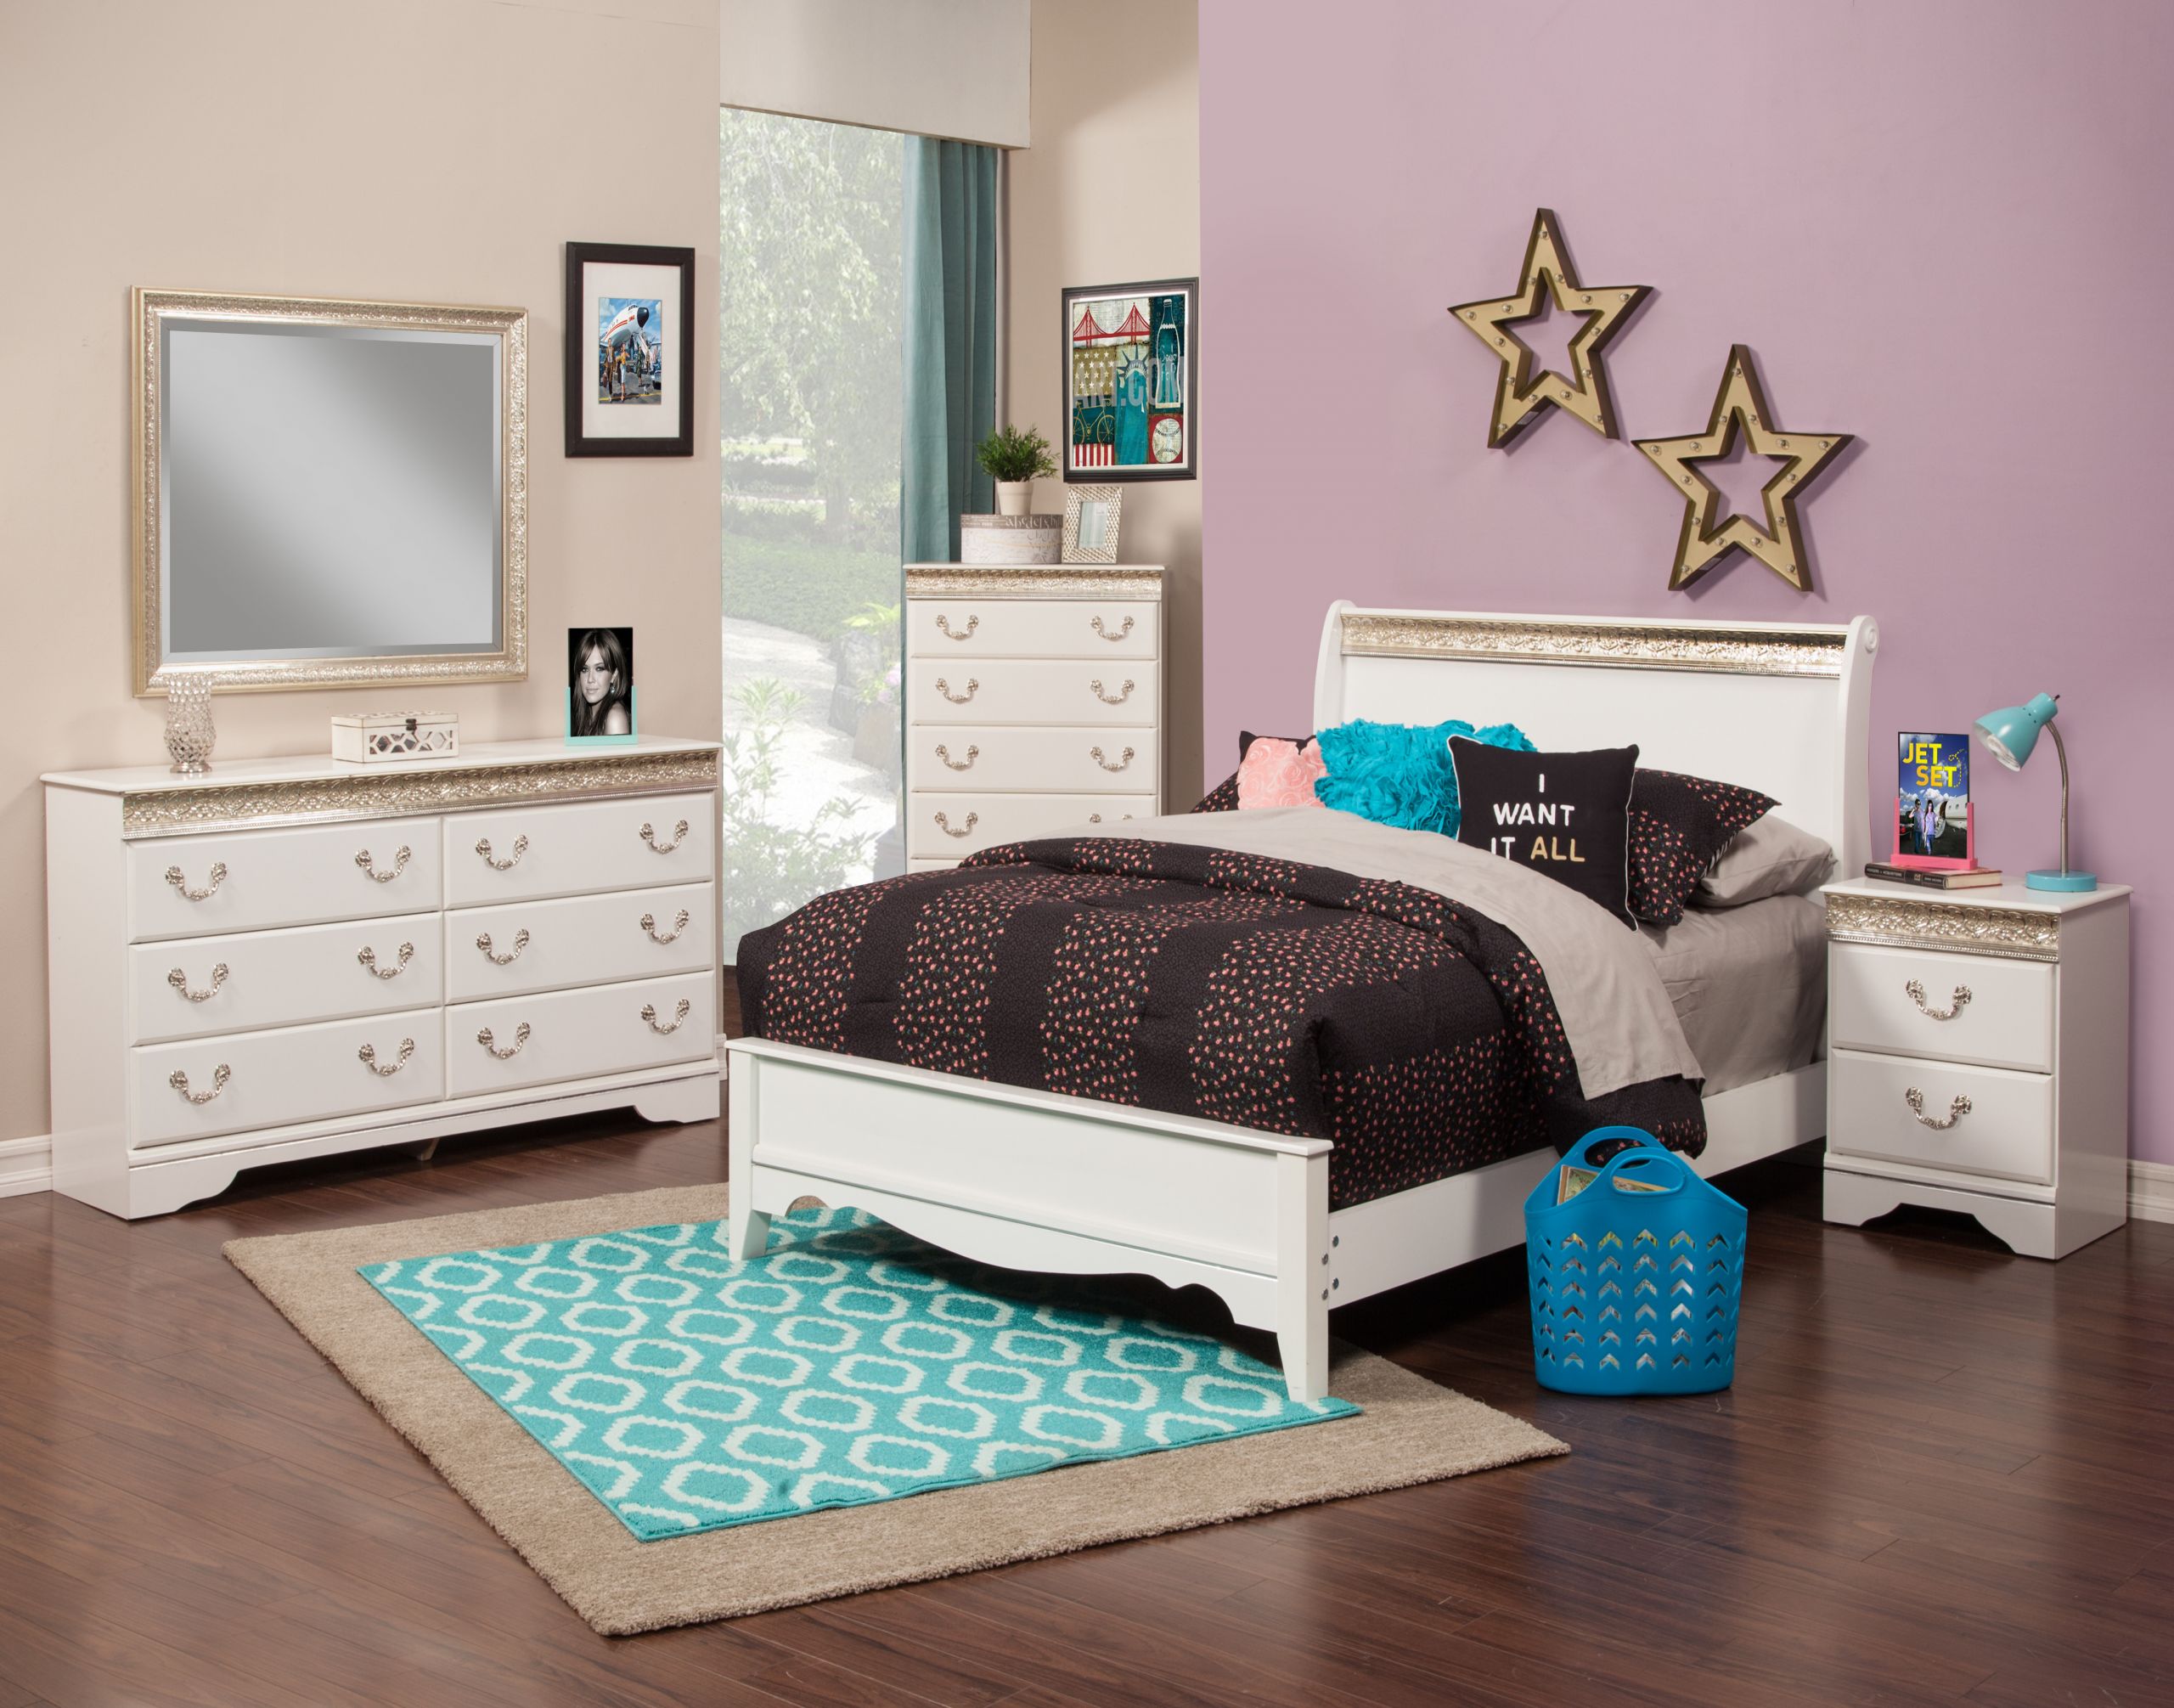 Furniture For A Small Bedroom
 Youth Bedroom